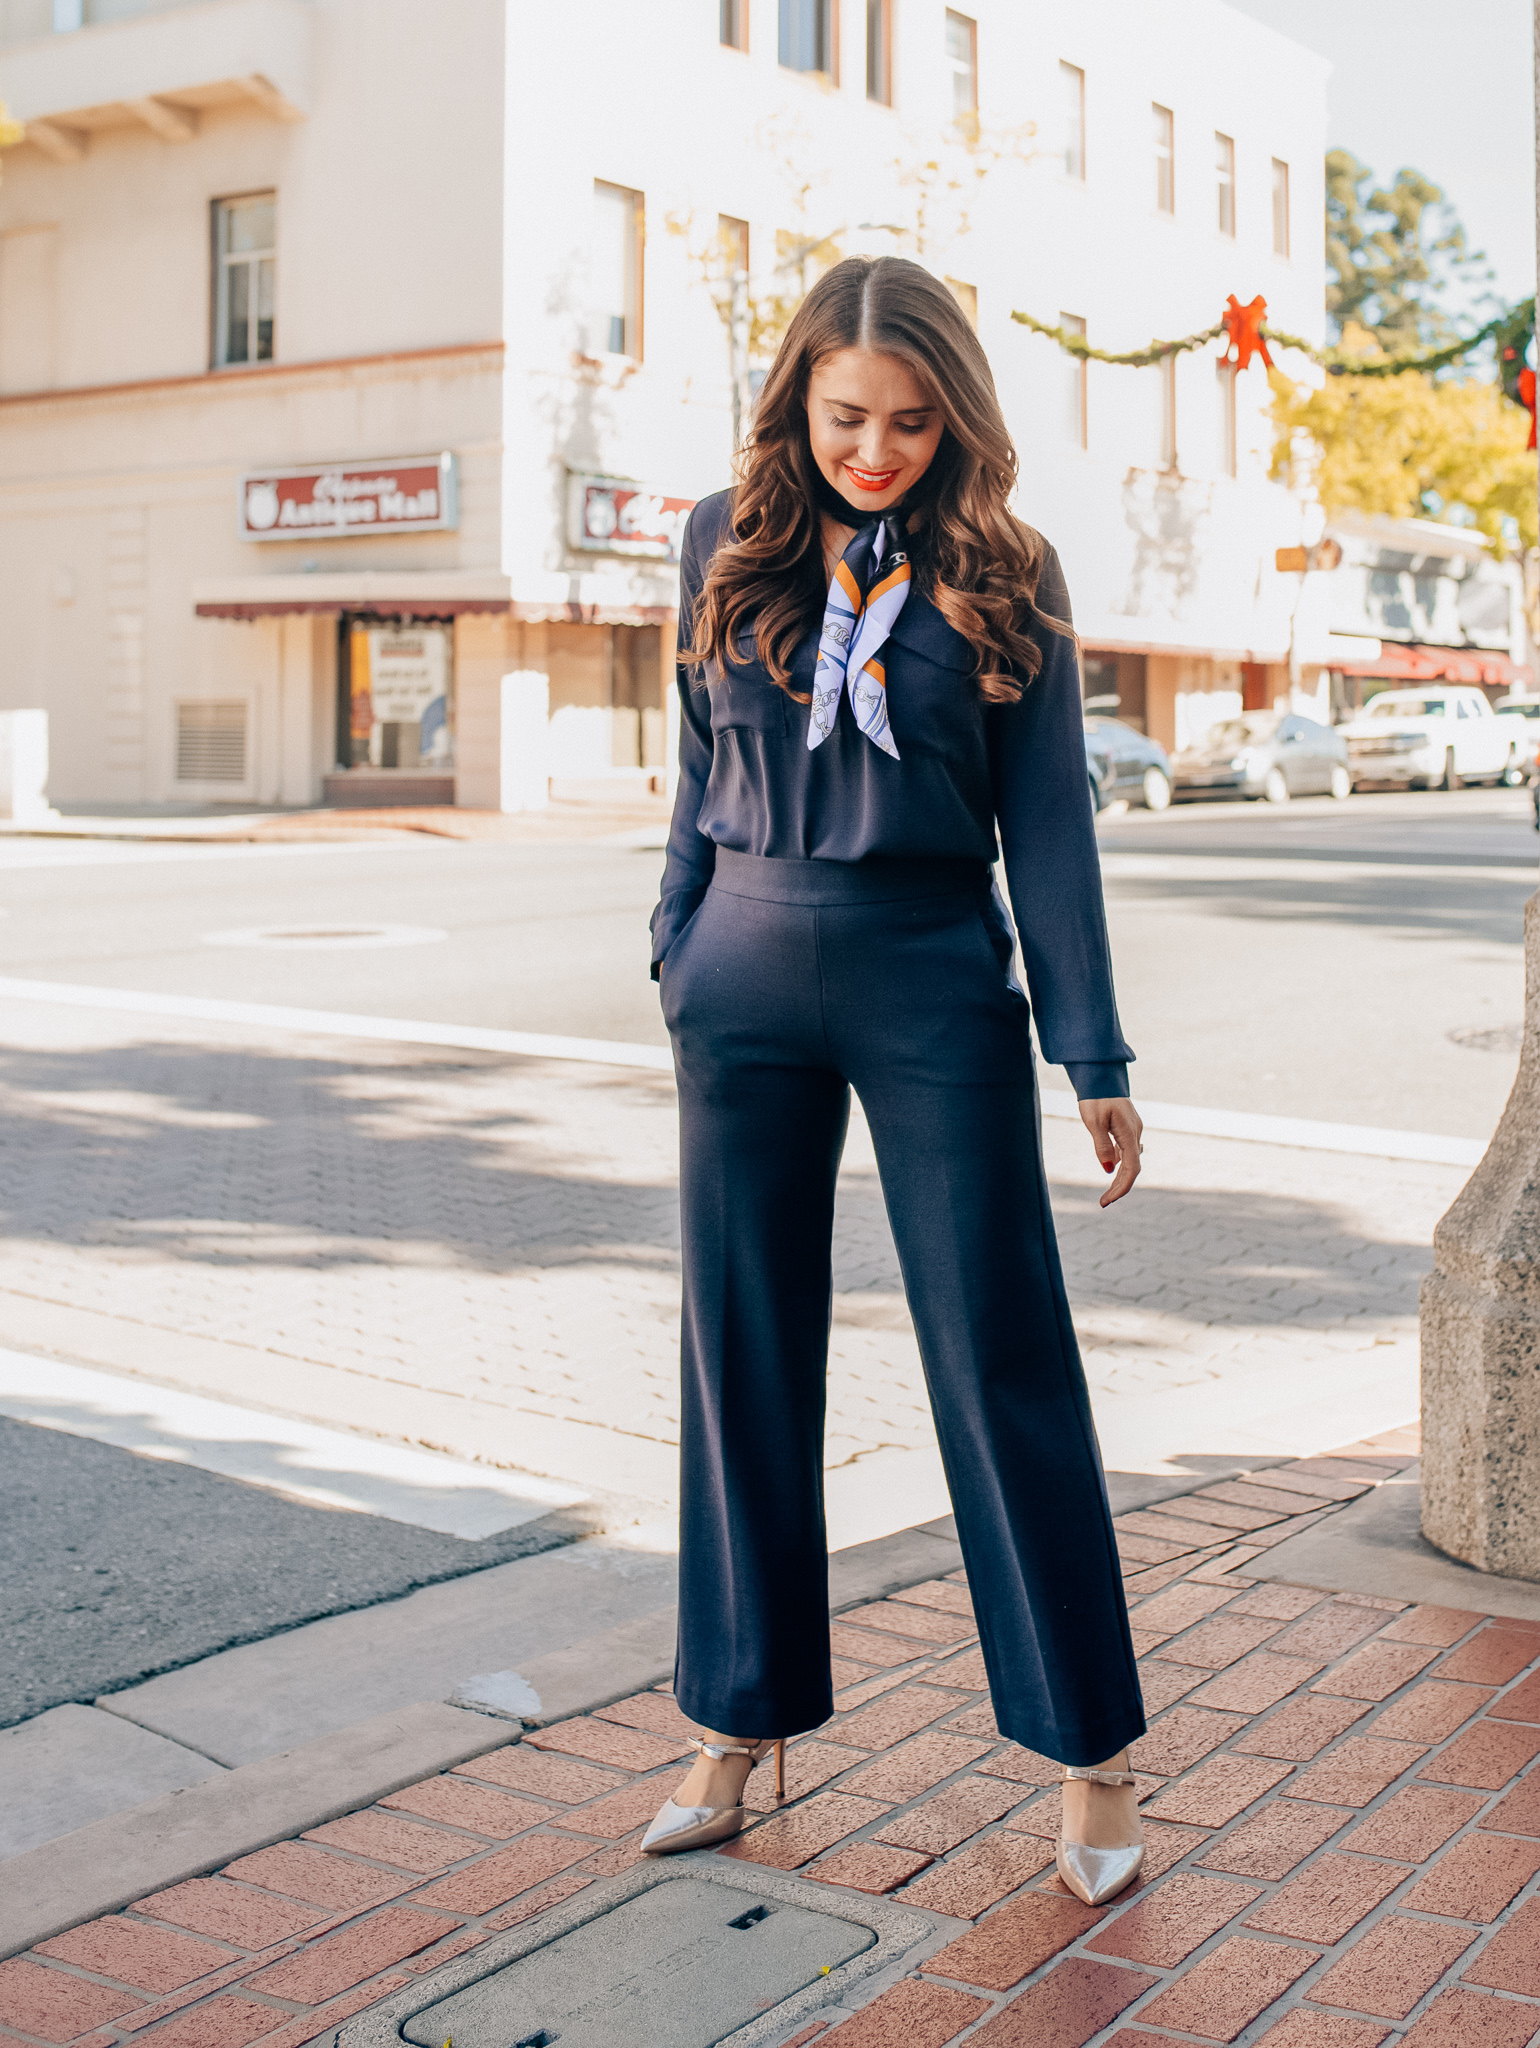 Winter workwear featured by top Orange County fashion blogger, Maxie Elise: image of a woman wearing an Ann Taylor blue slim shirt, Ann Taylor wide leg pants, Ann Taylor silk scarf, Ann Taylor metallic leather pumps and Ann Taylor camera bag